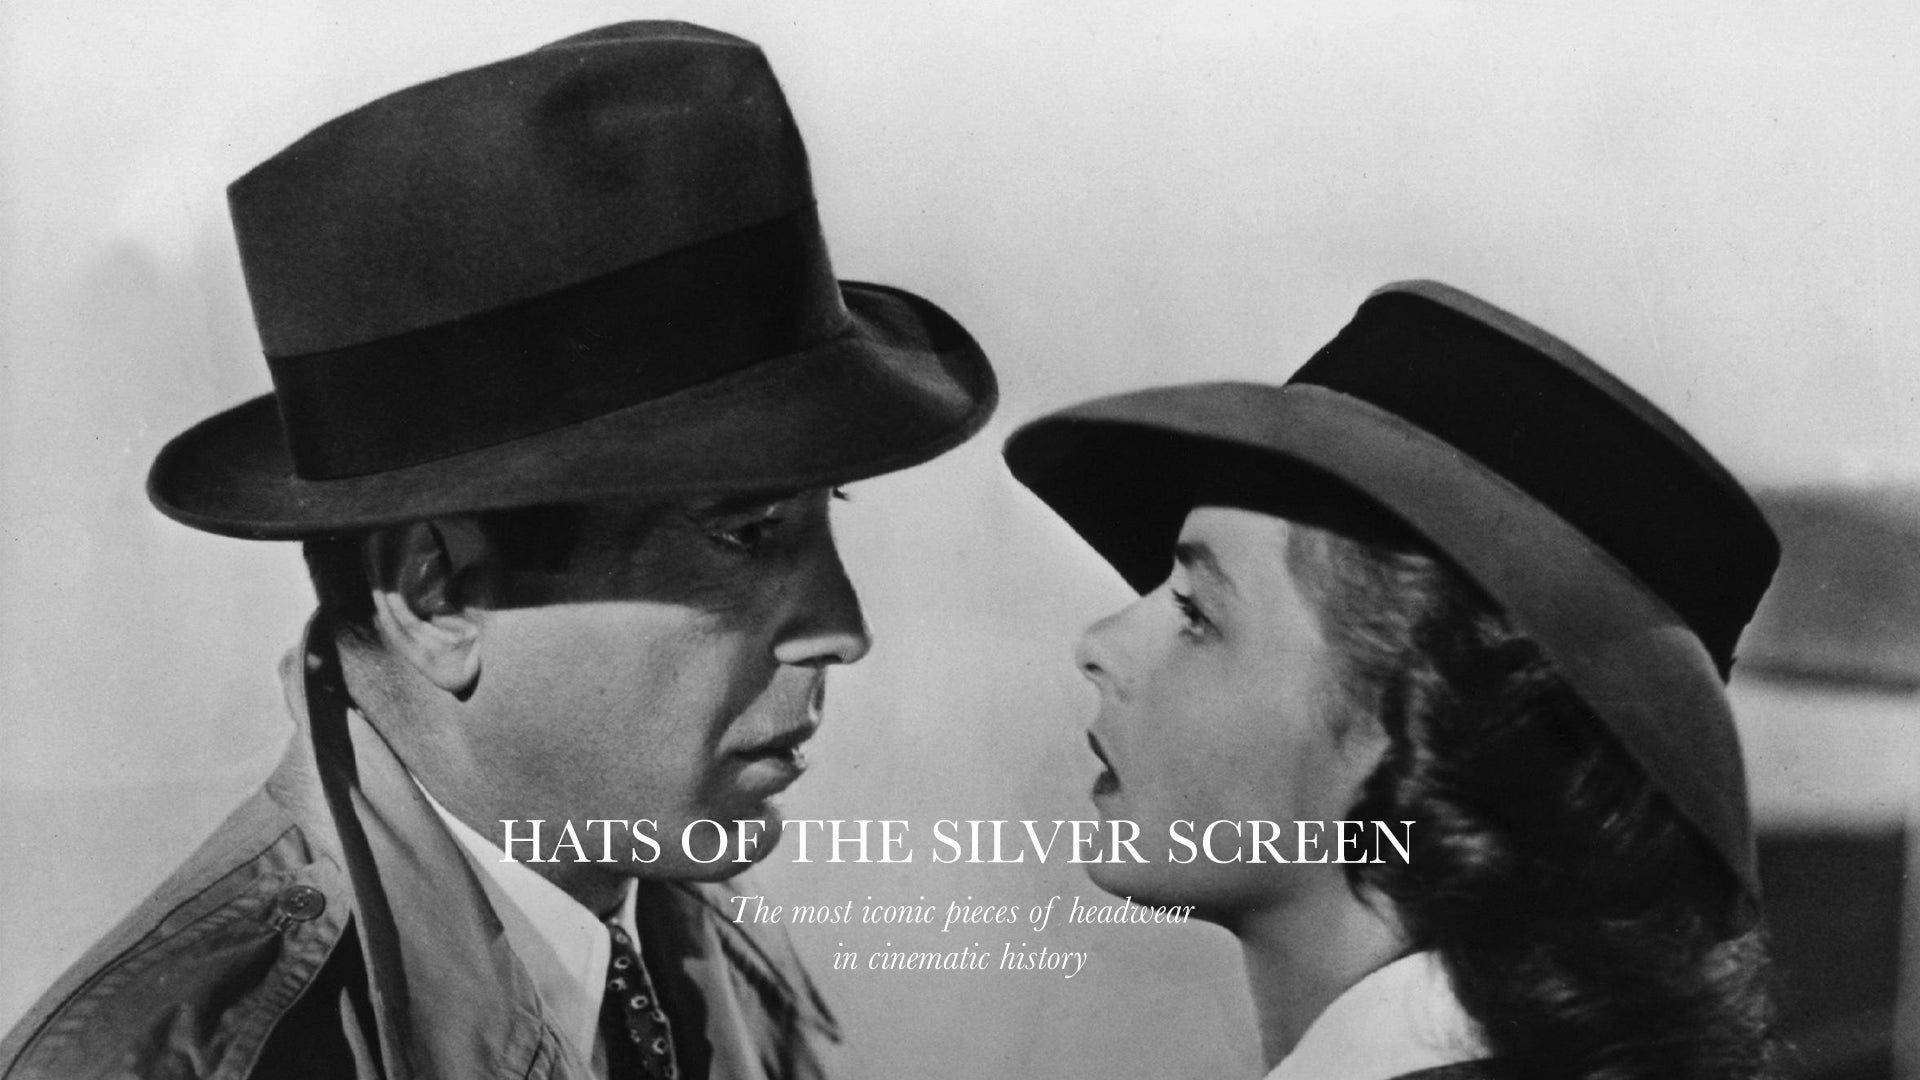 Hats of the Silver Screen – Some of the most iconic bits of headwear in cinematic history